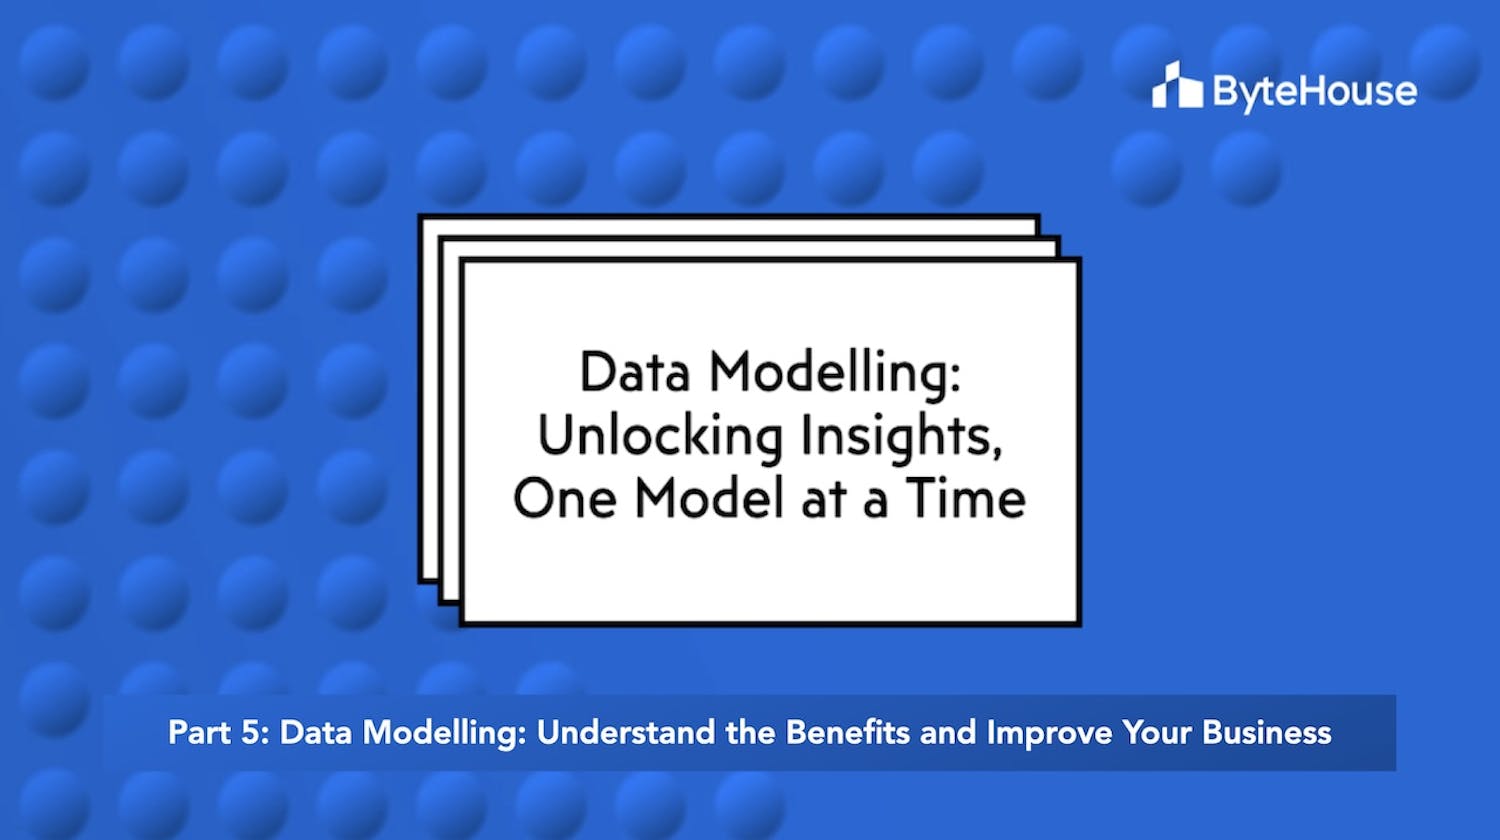 Data modelling: Understand the benefits and improve your business